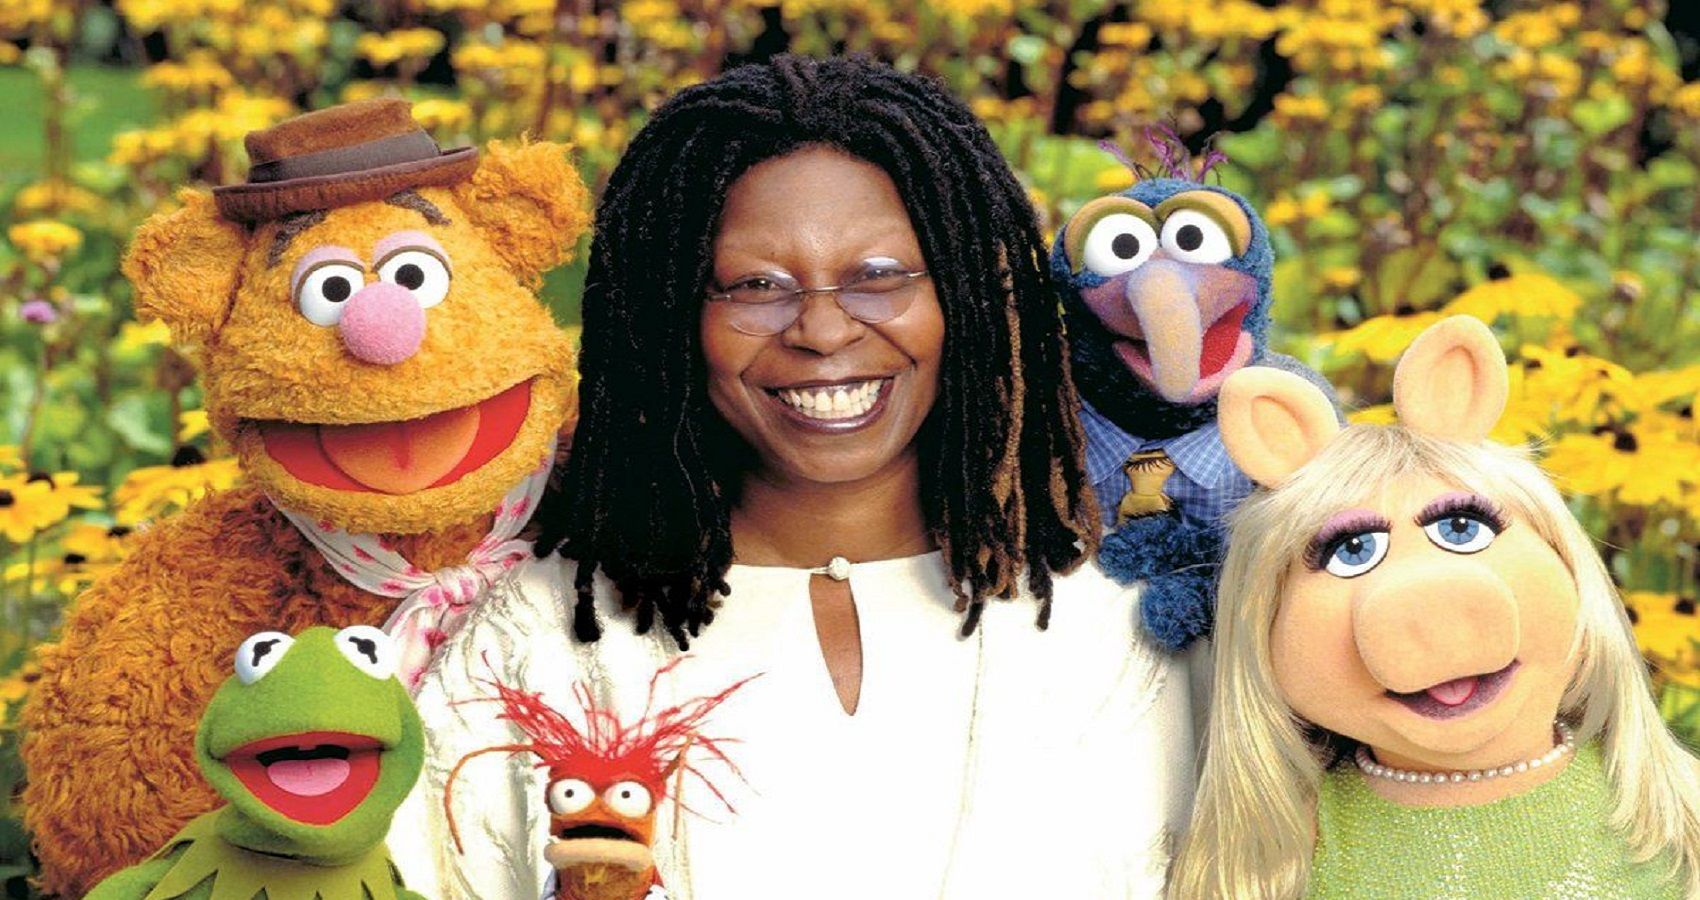 Whoopi Goldbergs 10 Best Movies According to Rotten Tomatoes